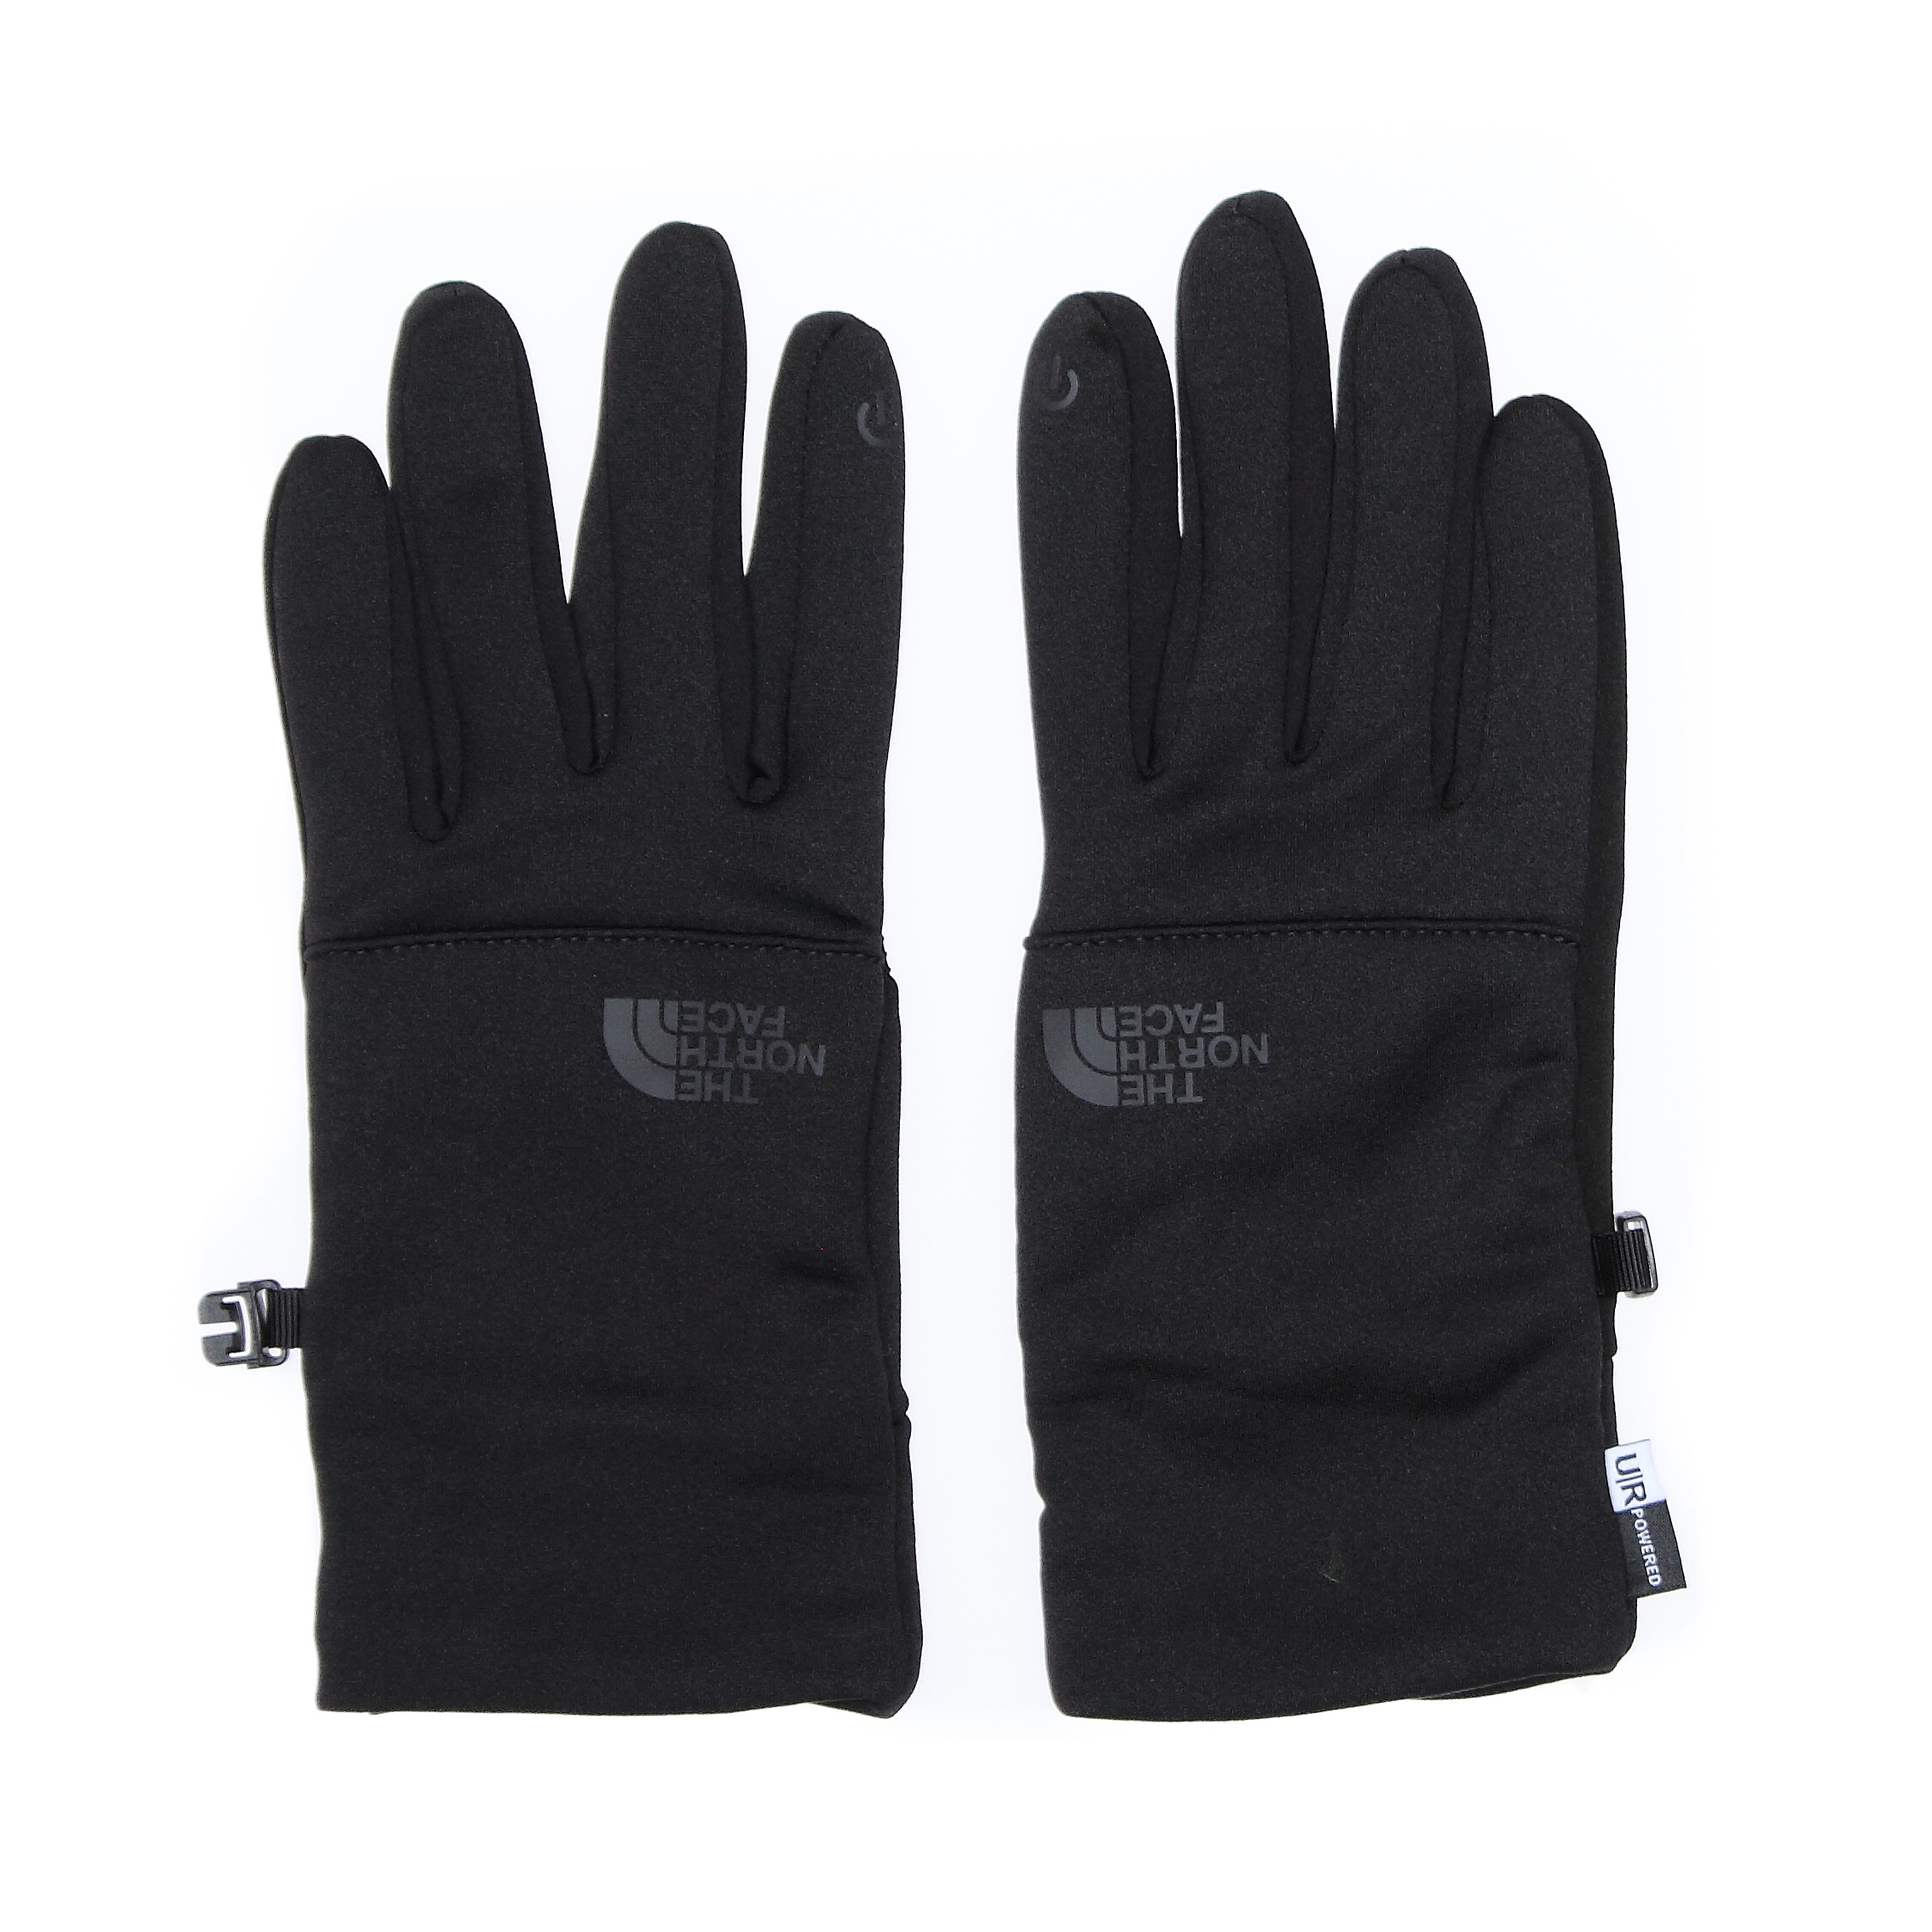 https://www.leadermode.com/210569/the-north-face-etip-recycled-glove-nf0a4shajk31-black.jpg